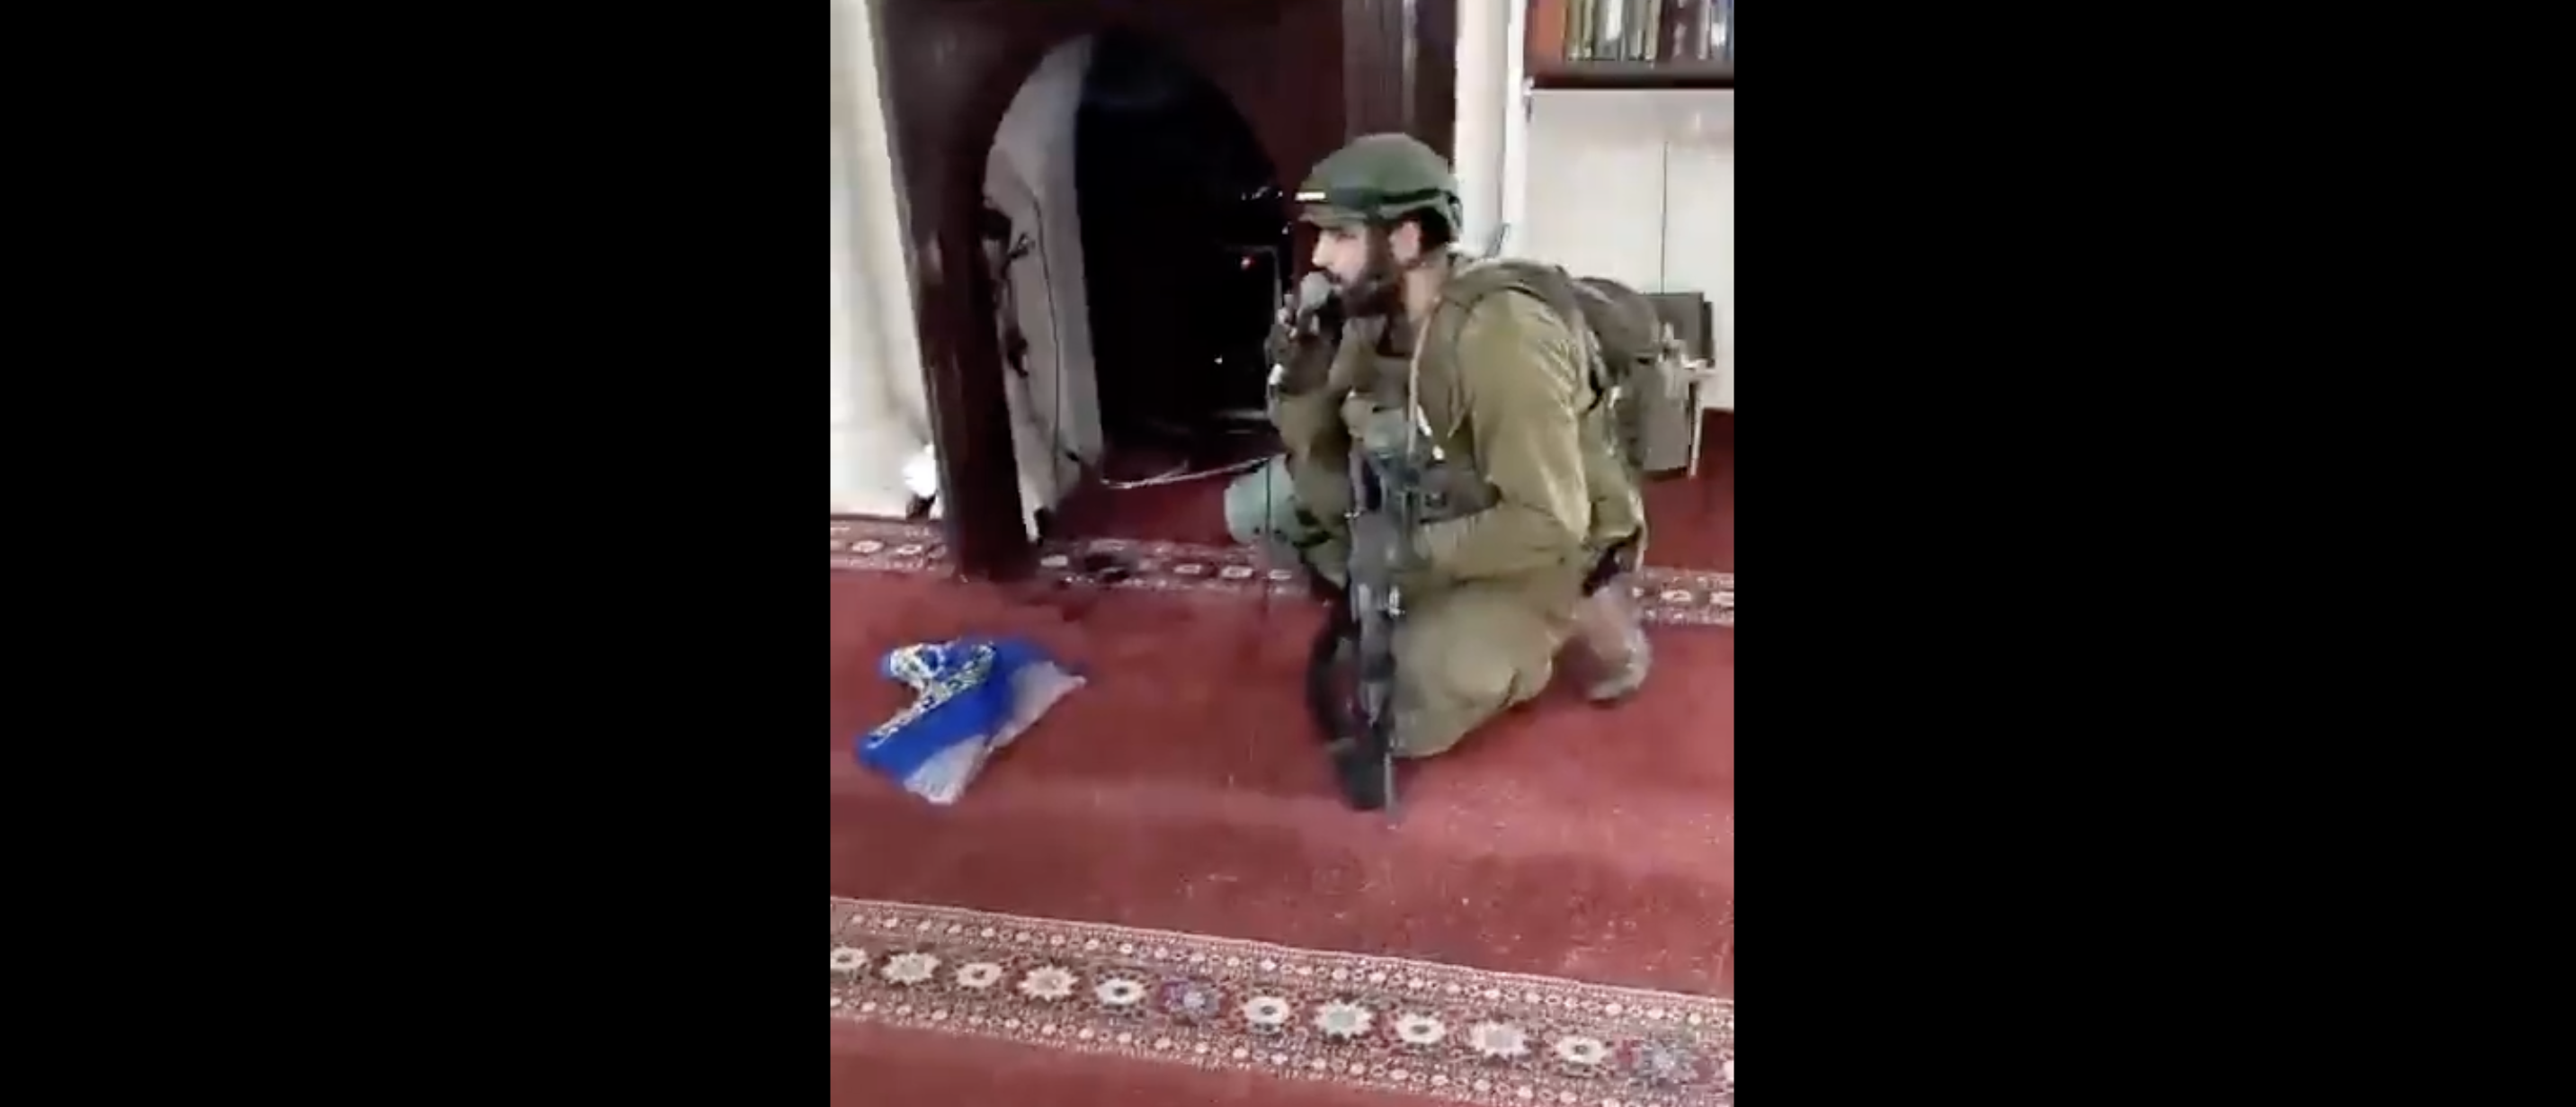 IDF Suspends Soldiers After They Used Mosque Loudspeakers To Broadcast Jewish Prayers